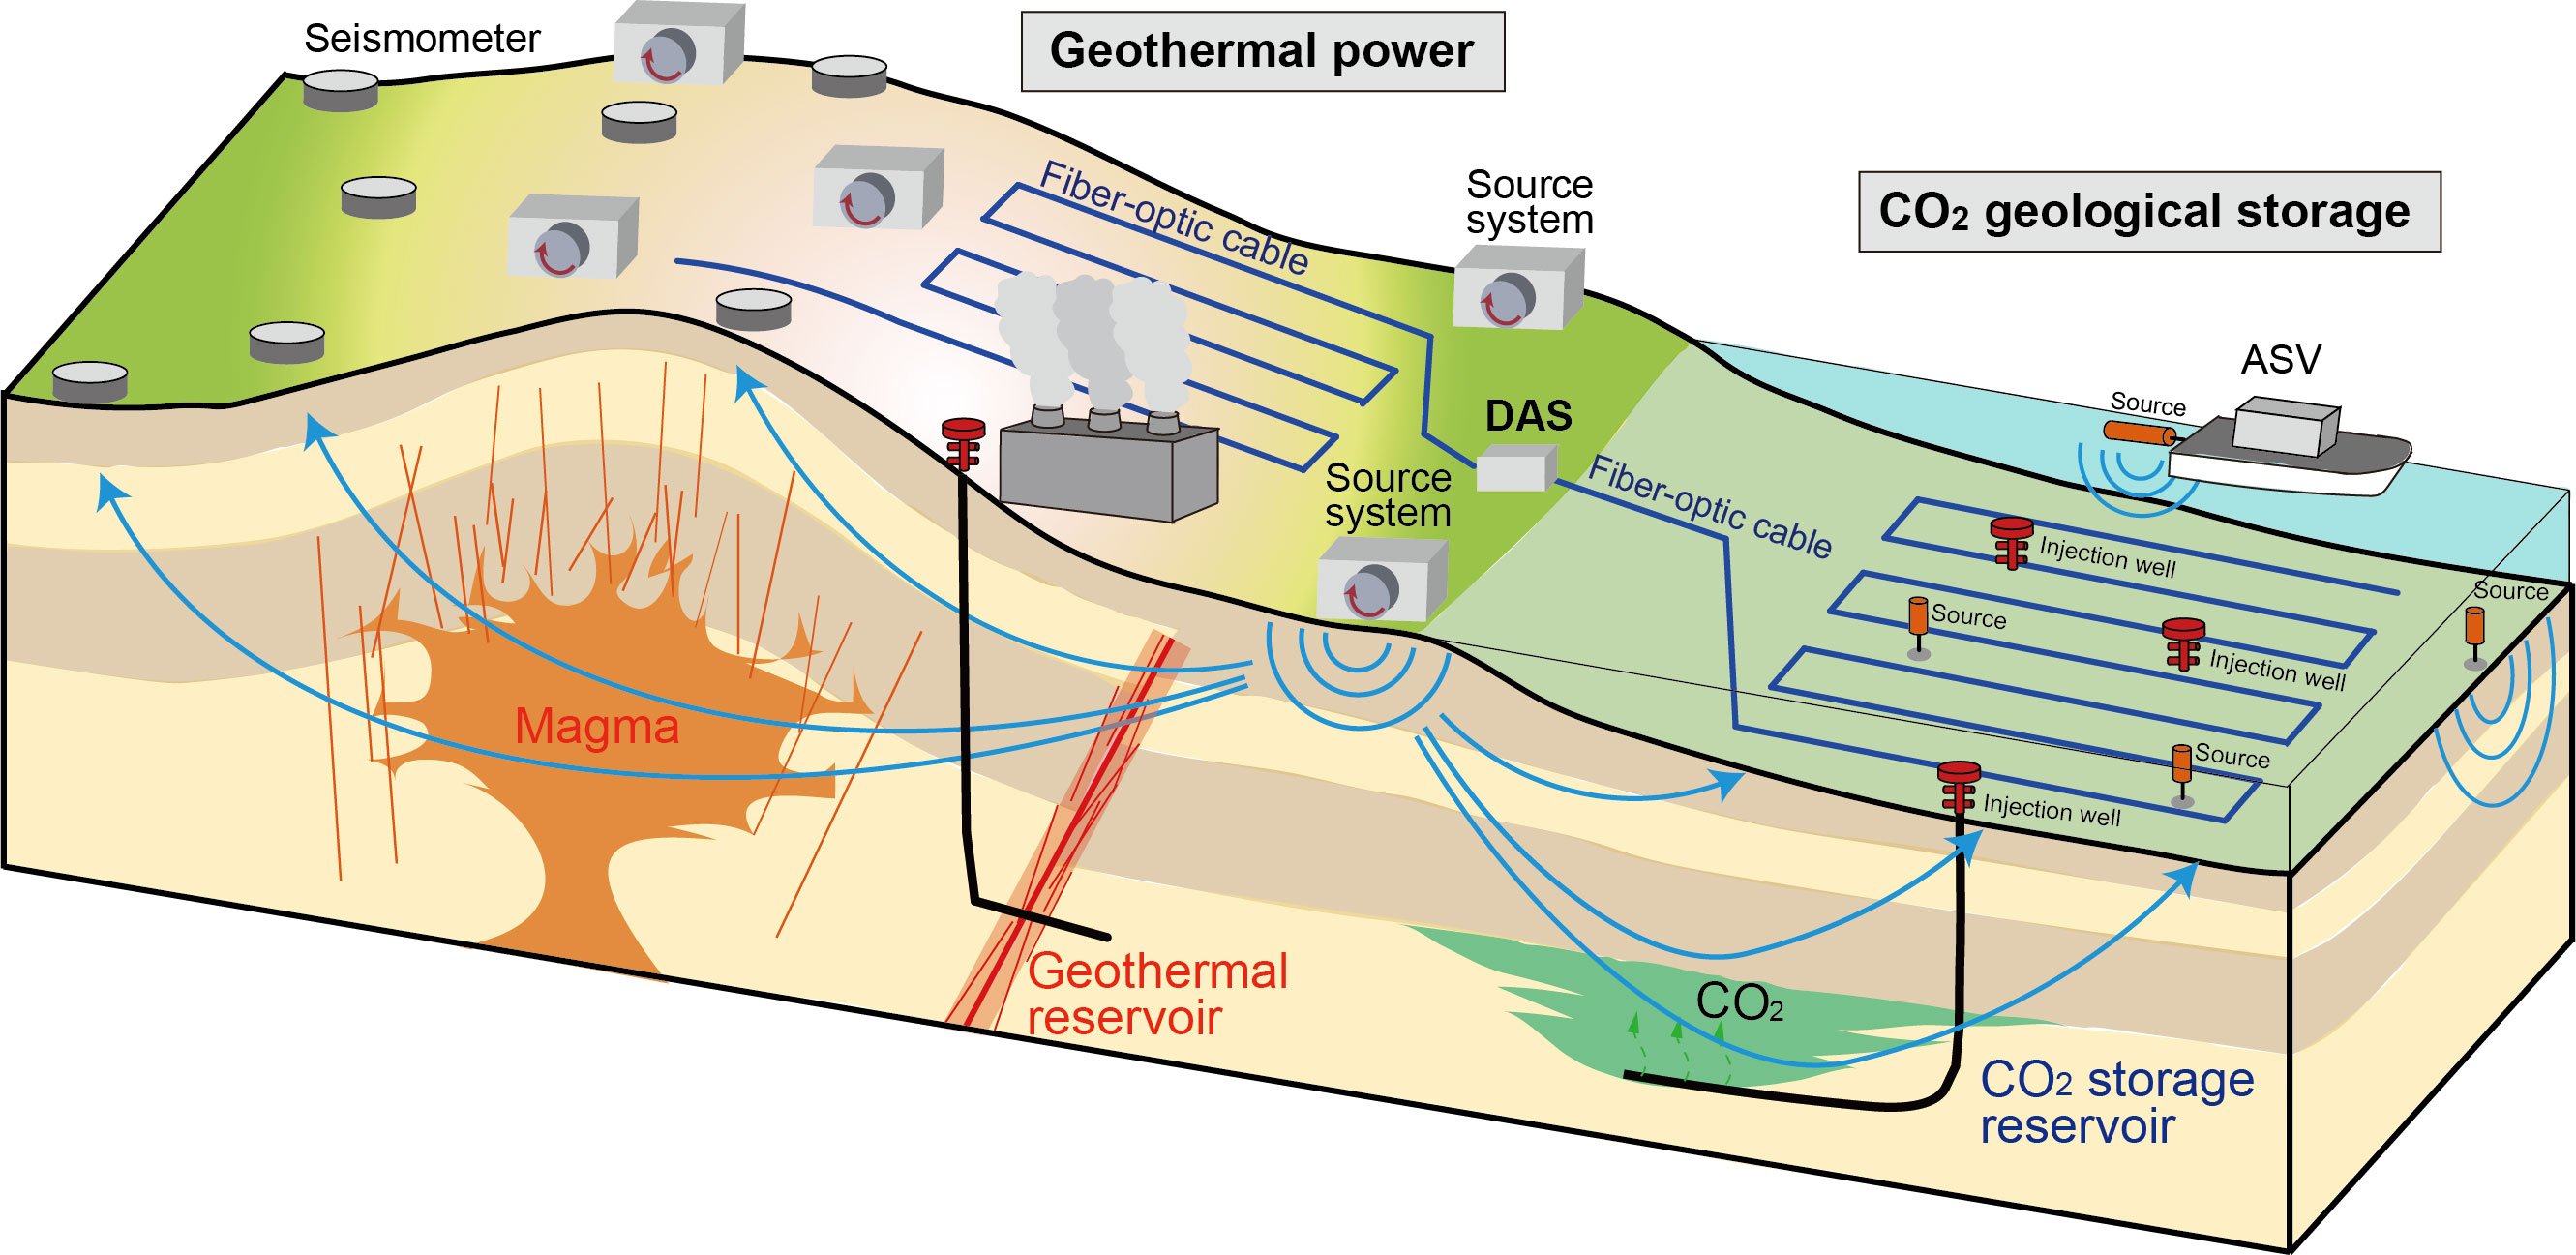 Next-generation system for continuous monitoring of underground geothermal and sequestered carbon dioxide reservoirs. Source: Takeshi Tsuji et al., Scientific Reports